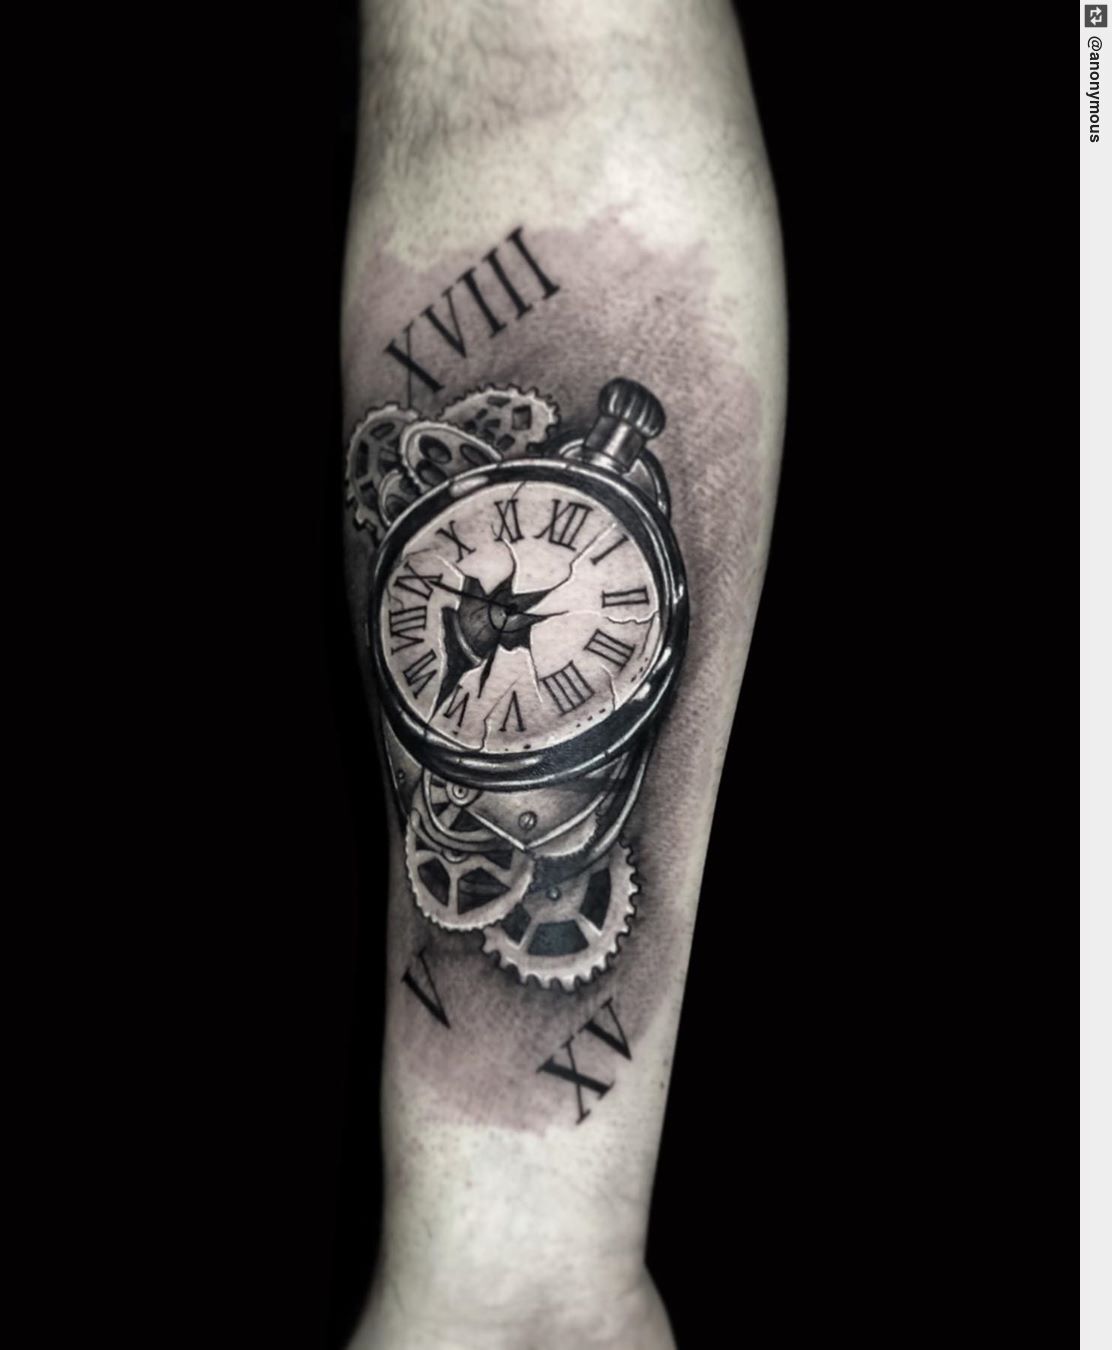 Pocket watch and roses around... - Lighthouse tattoo shop | Facebook